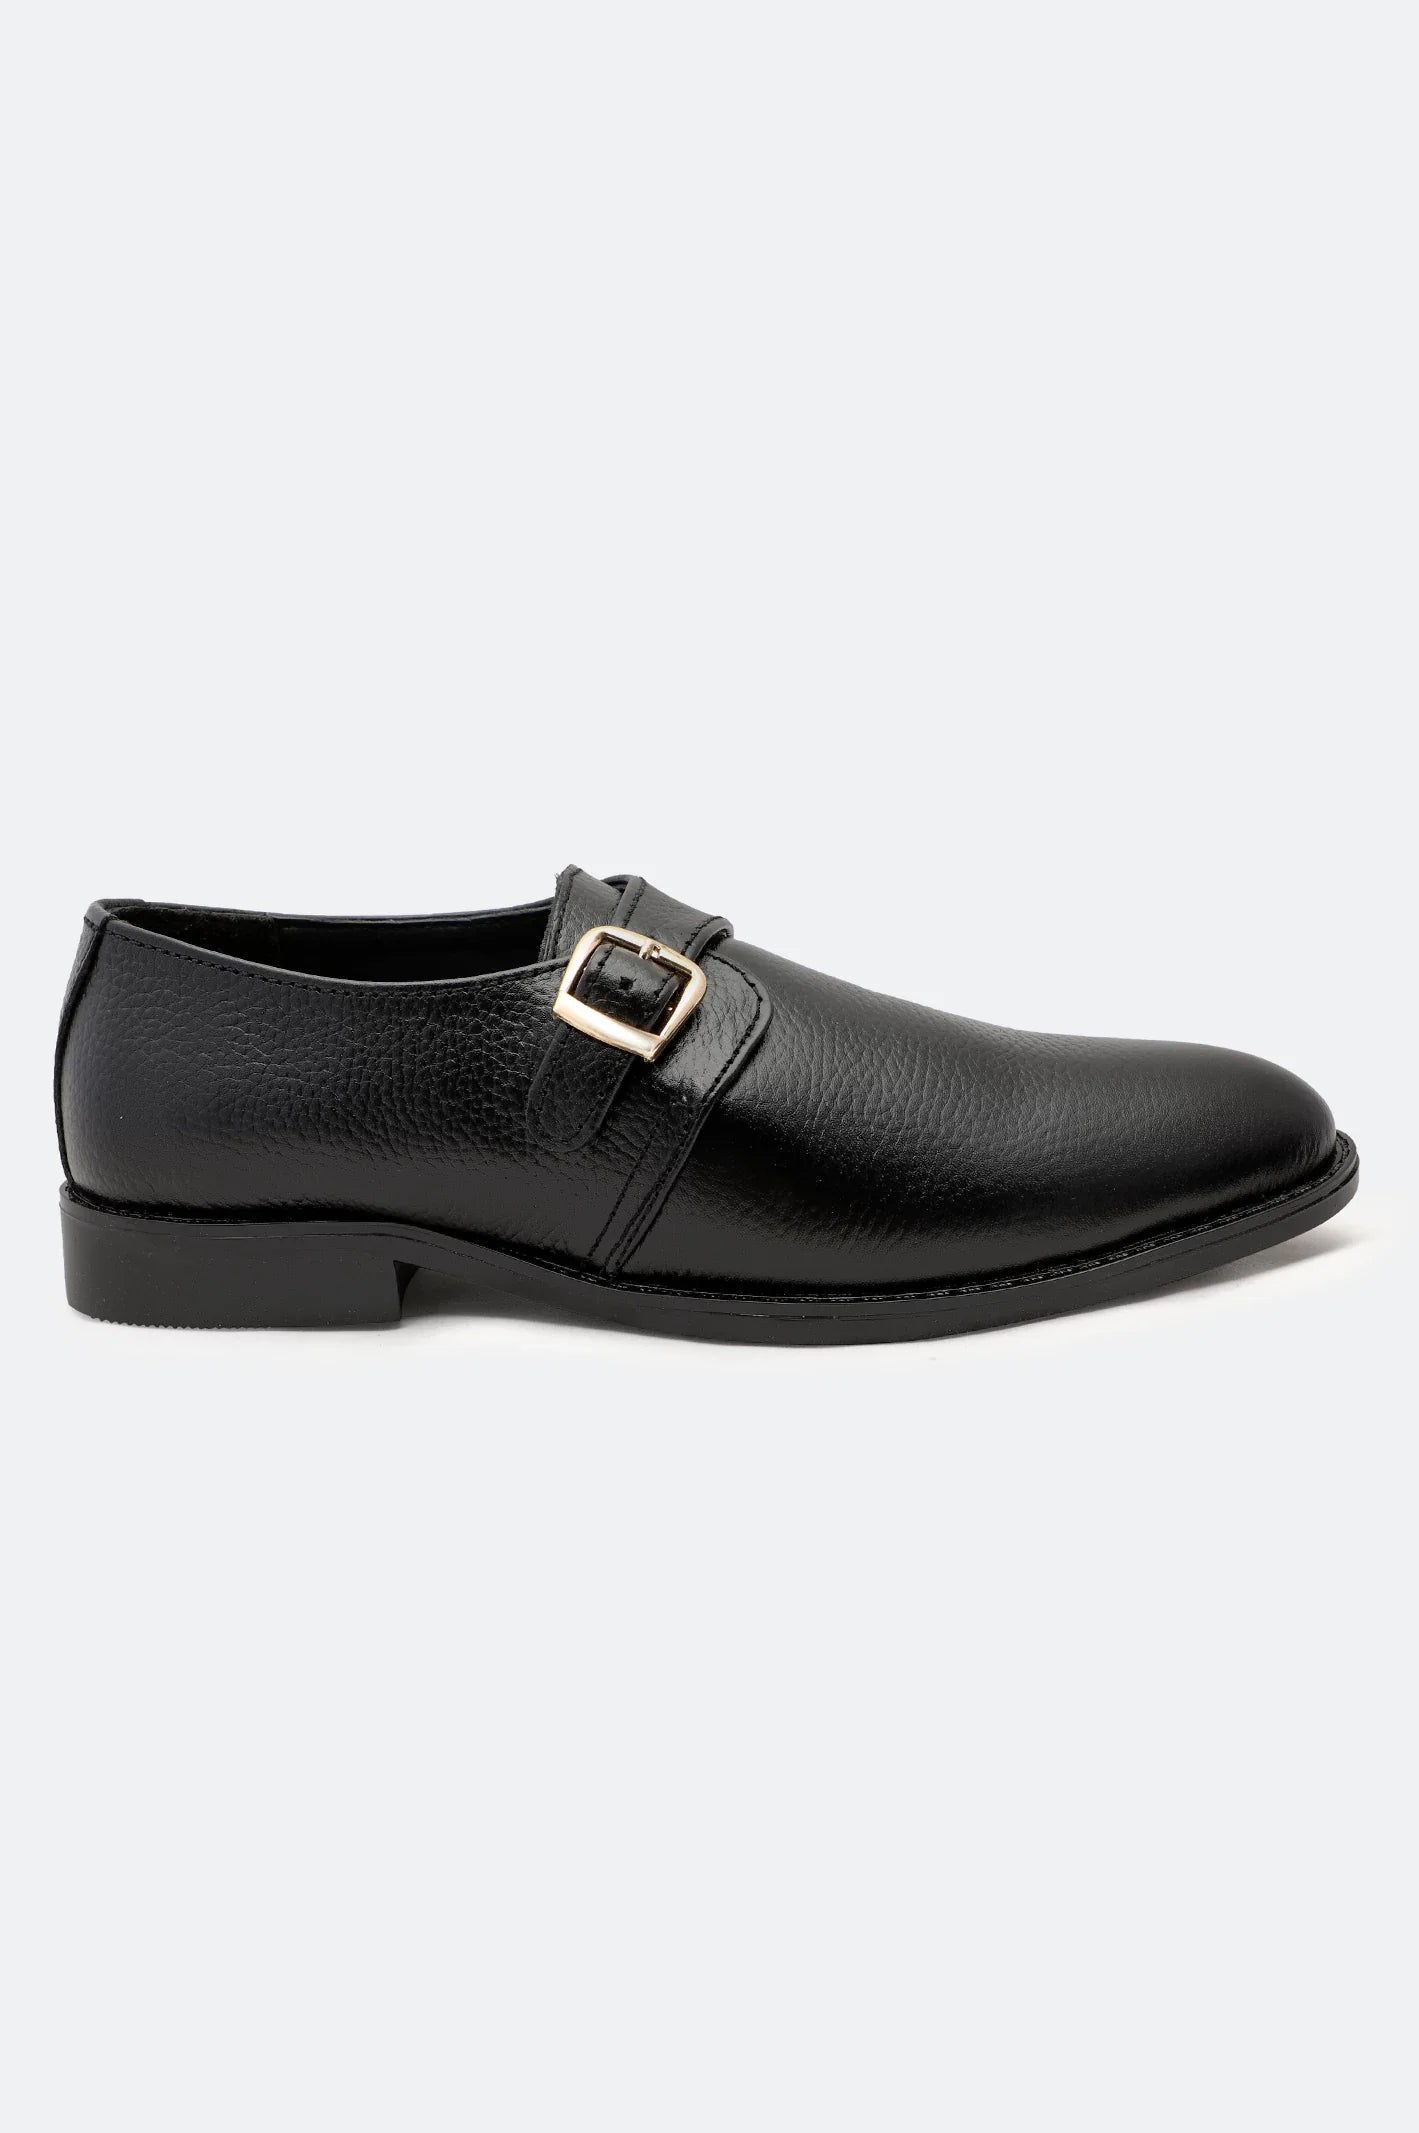 Black Formal Monk Shoes From French Emporio By Diners